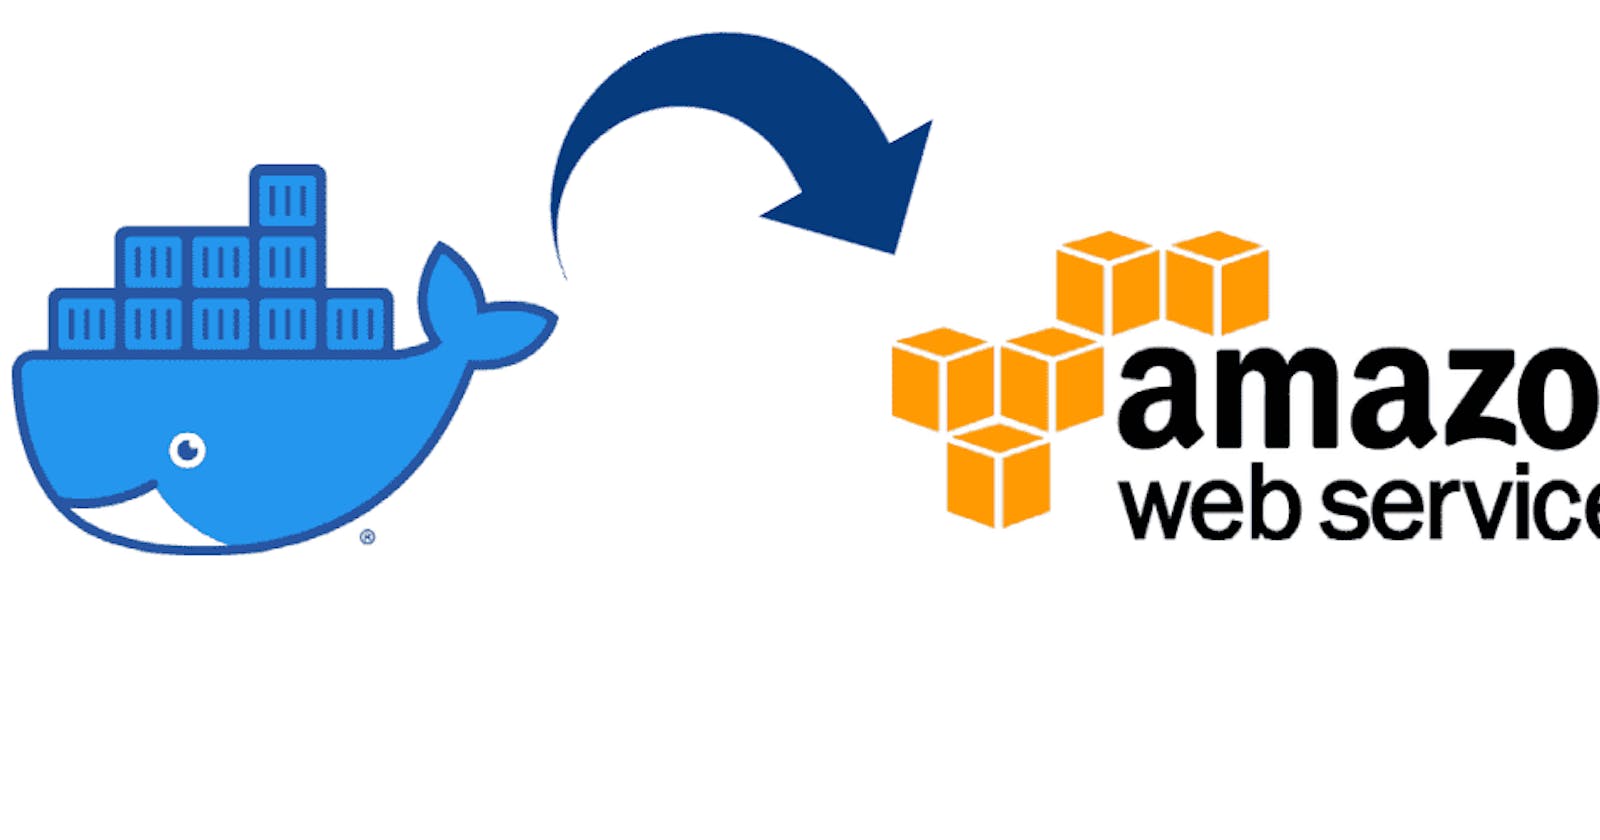 Dockerizing and Deploying an Application on AWS with ECR